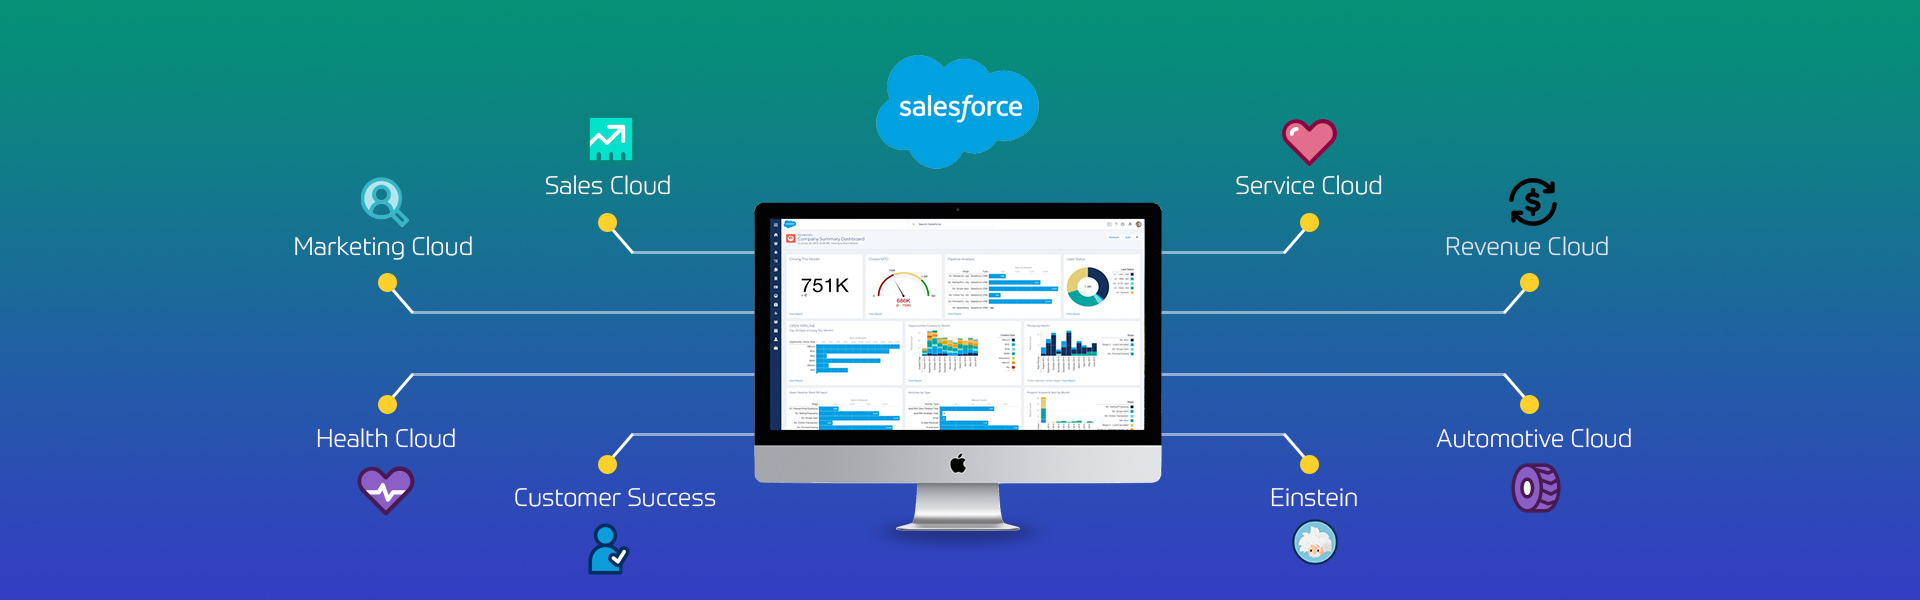 Salesforce-Home-Page-Banner-4